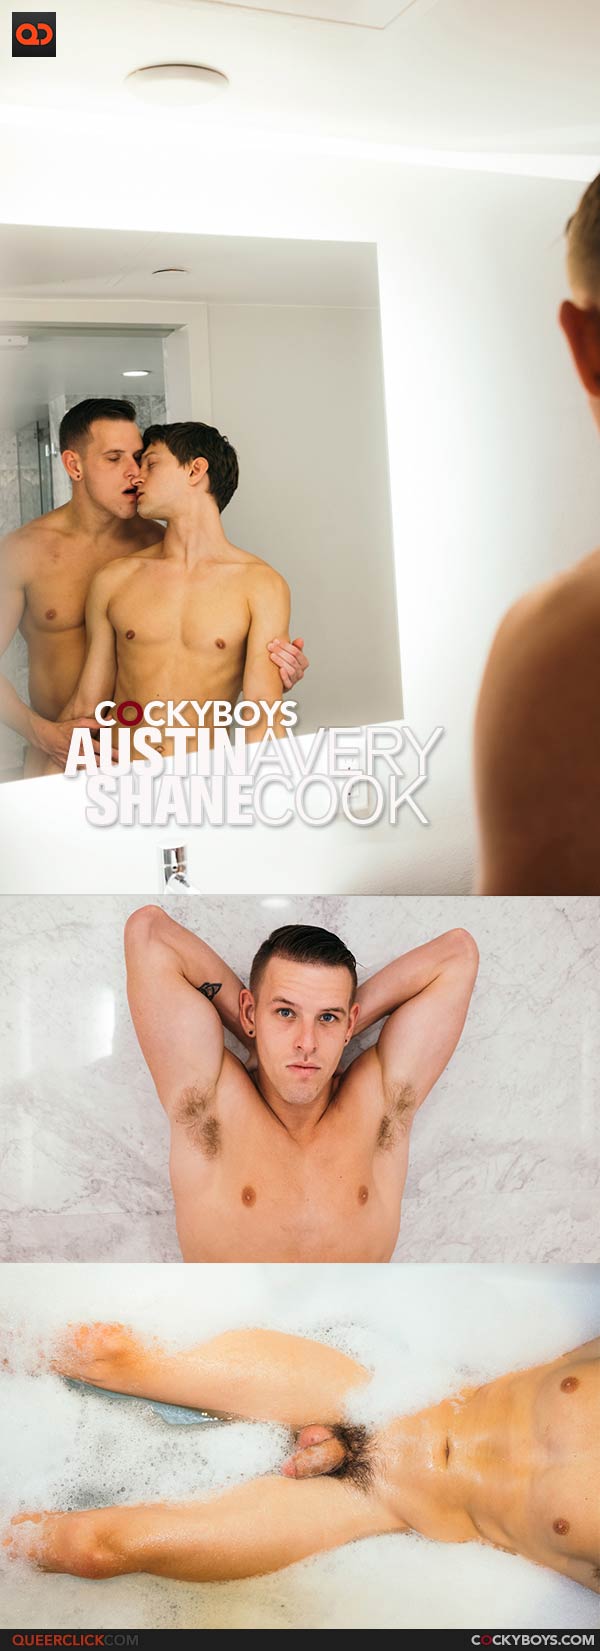 CockyBoys: Austin Avery and Shane Cook